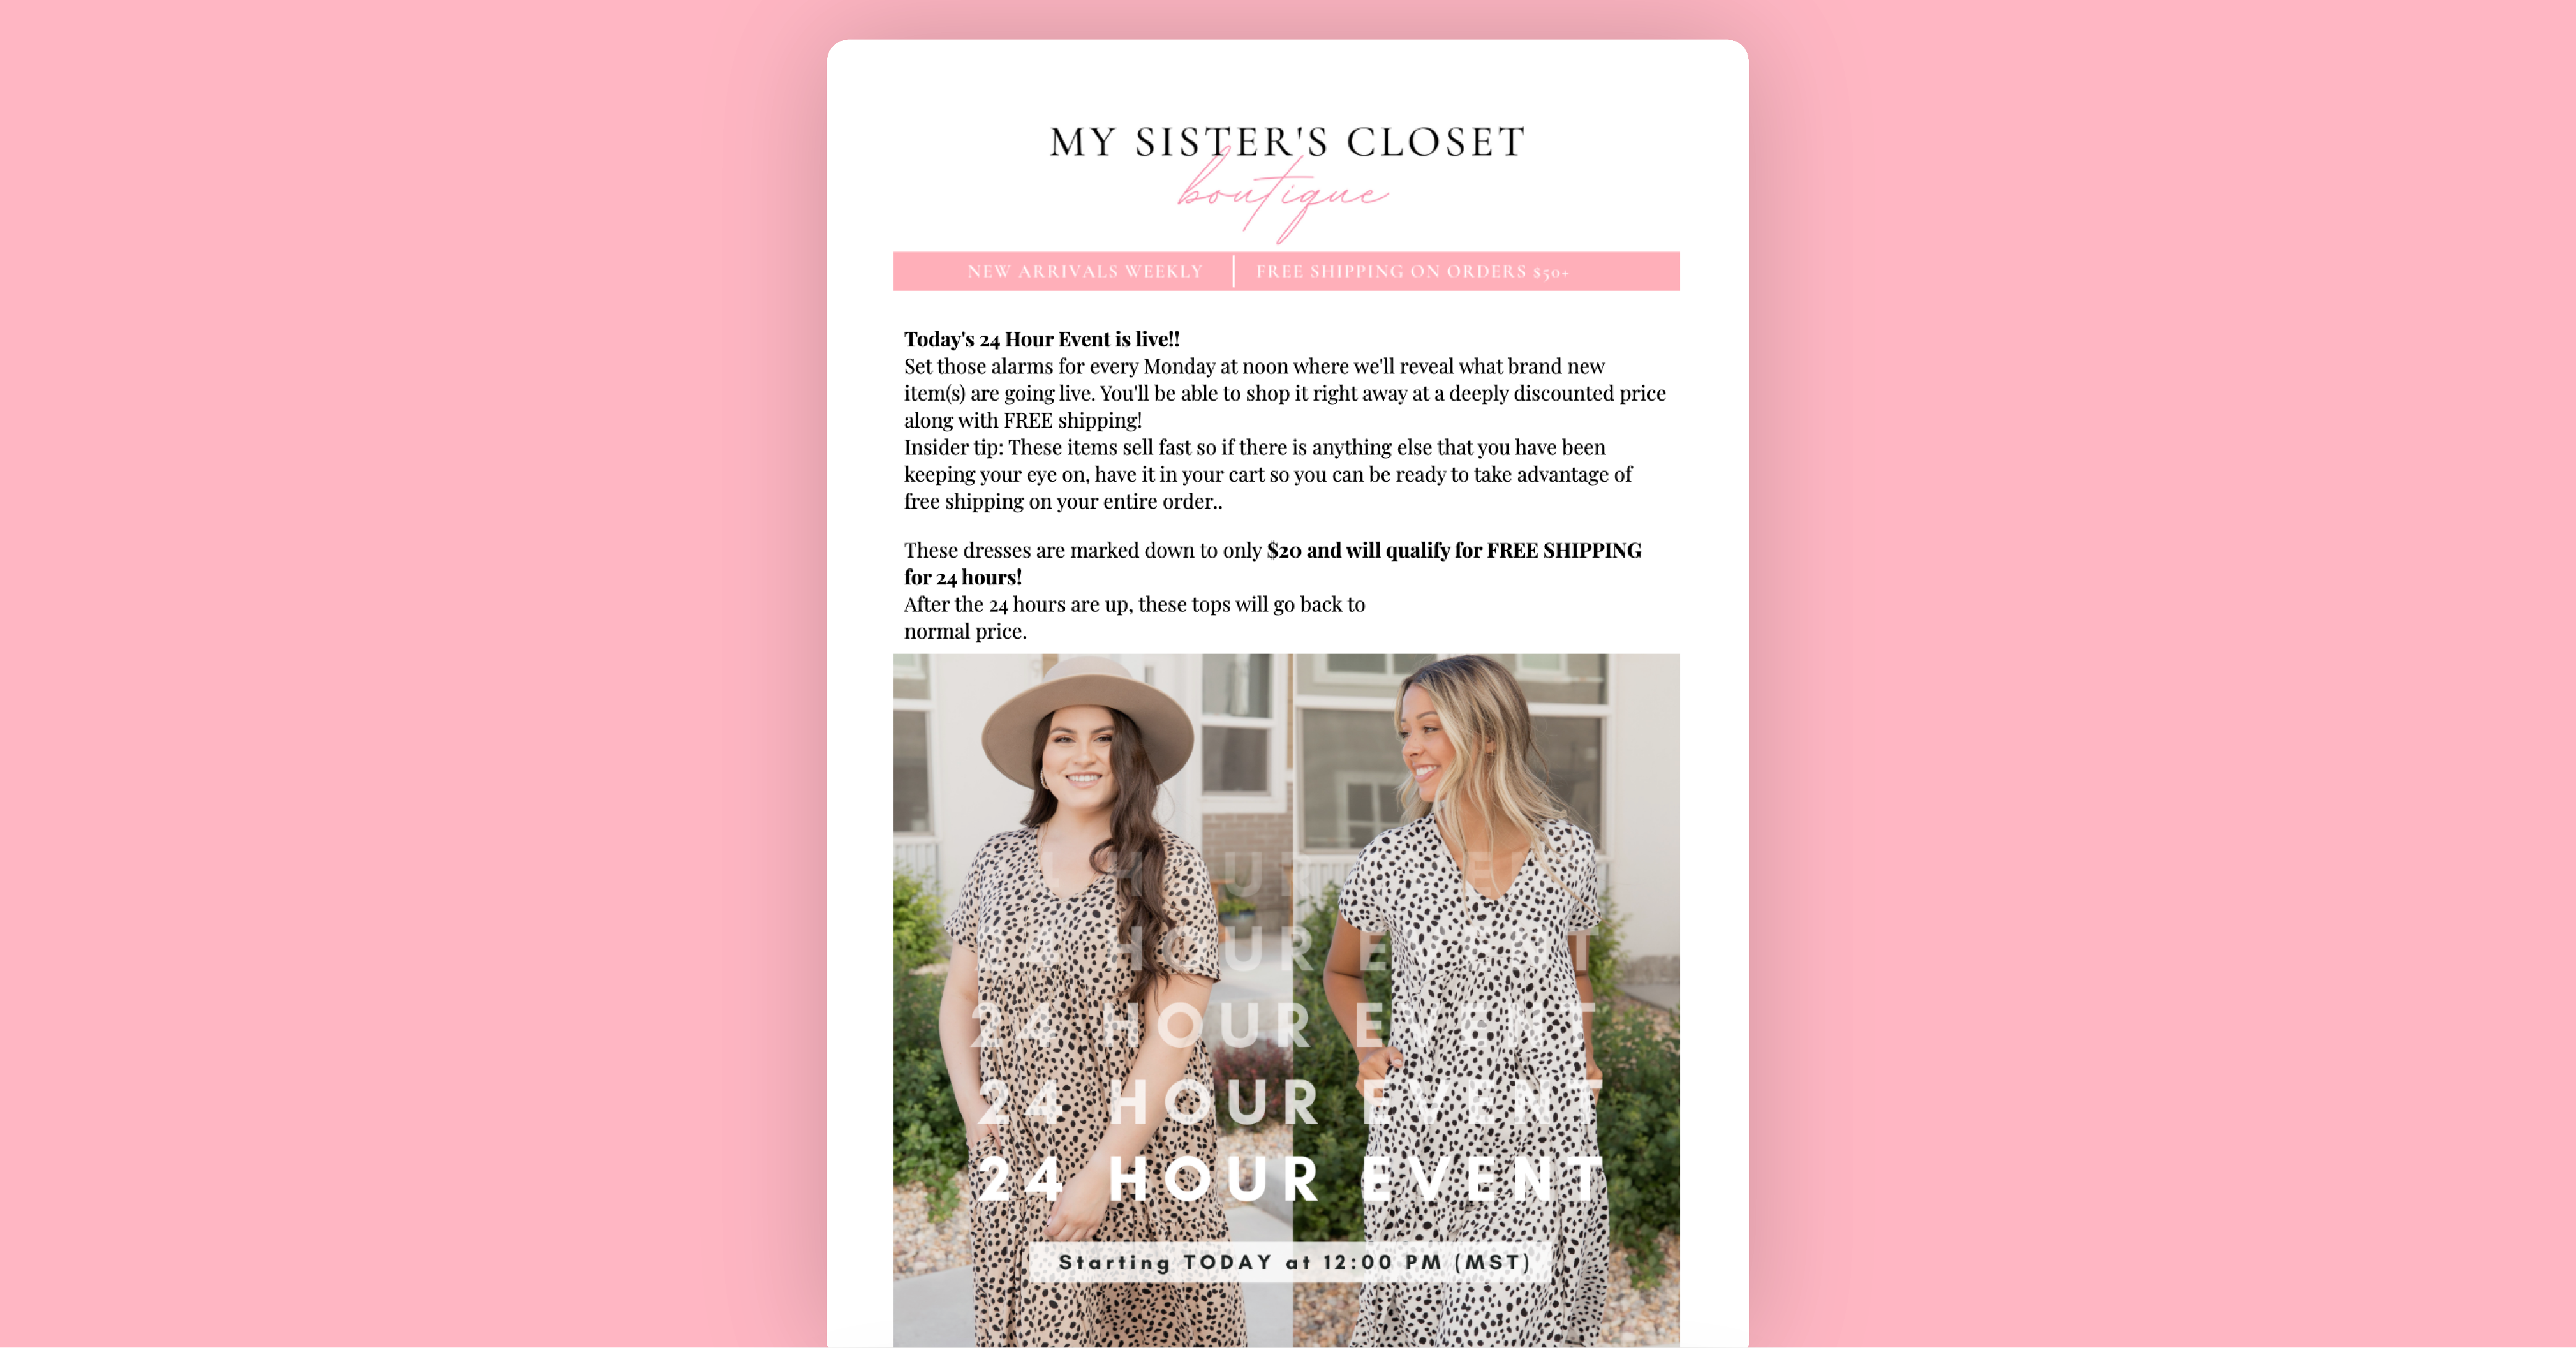 My Sisters Closets 24 Hour Event email campaign.